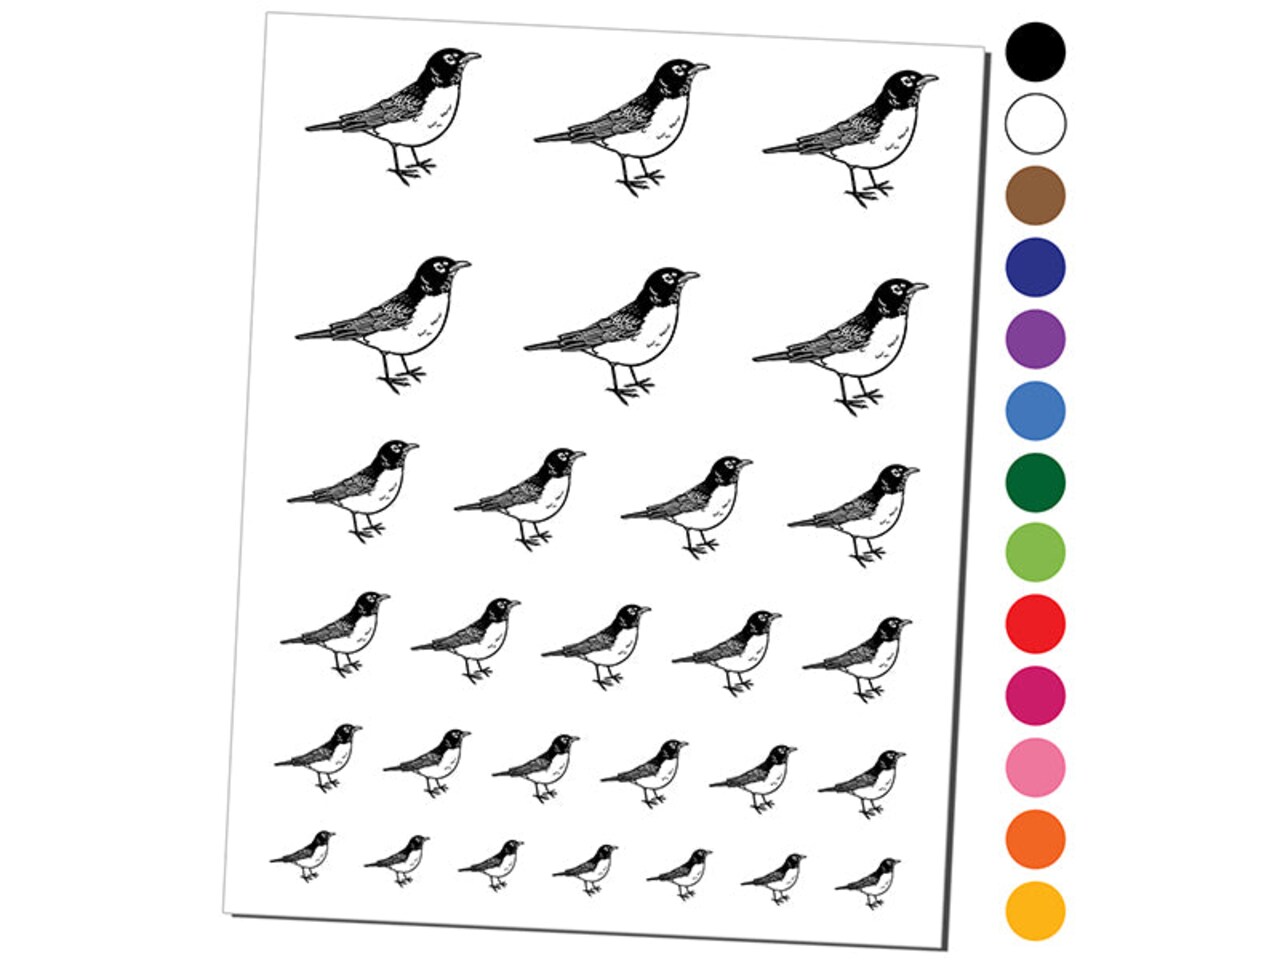 Delightful American Robin Bird Temporary Tattoo Water Resistant Fake Body Art Set Collection